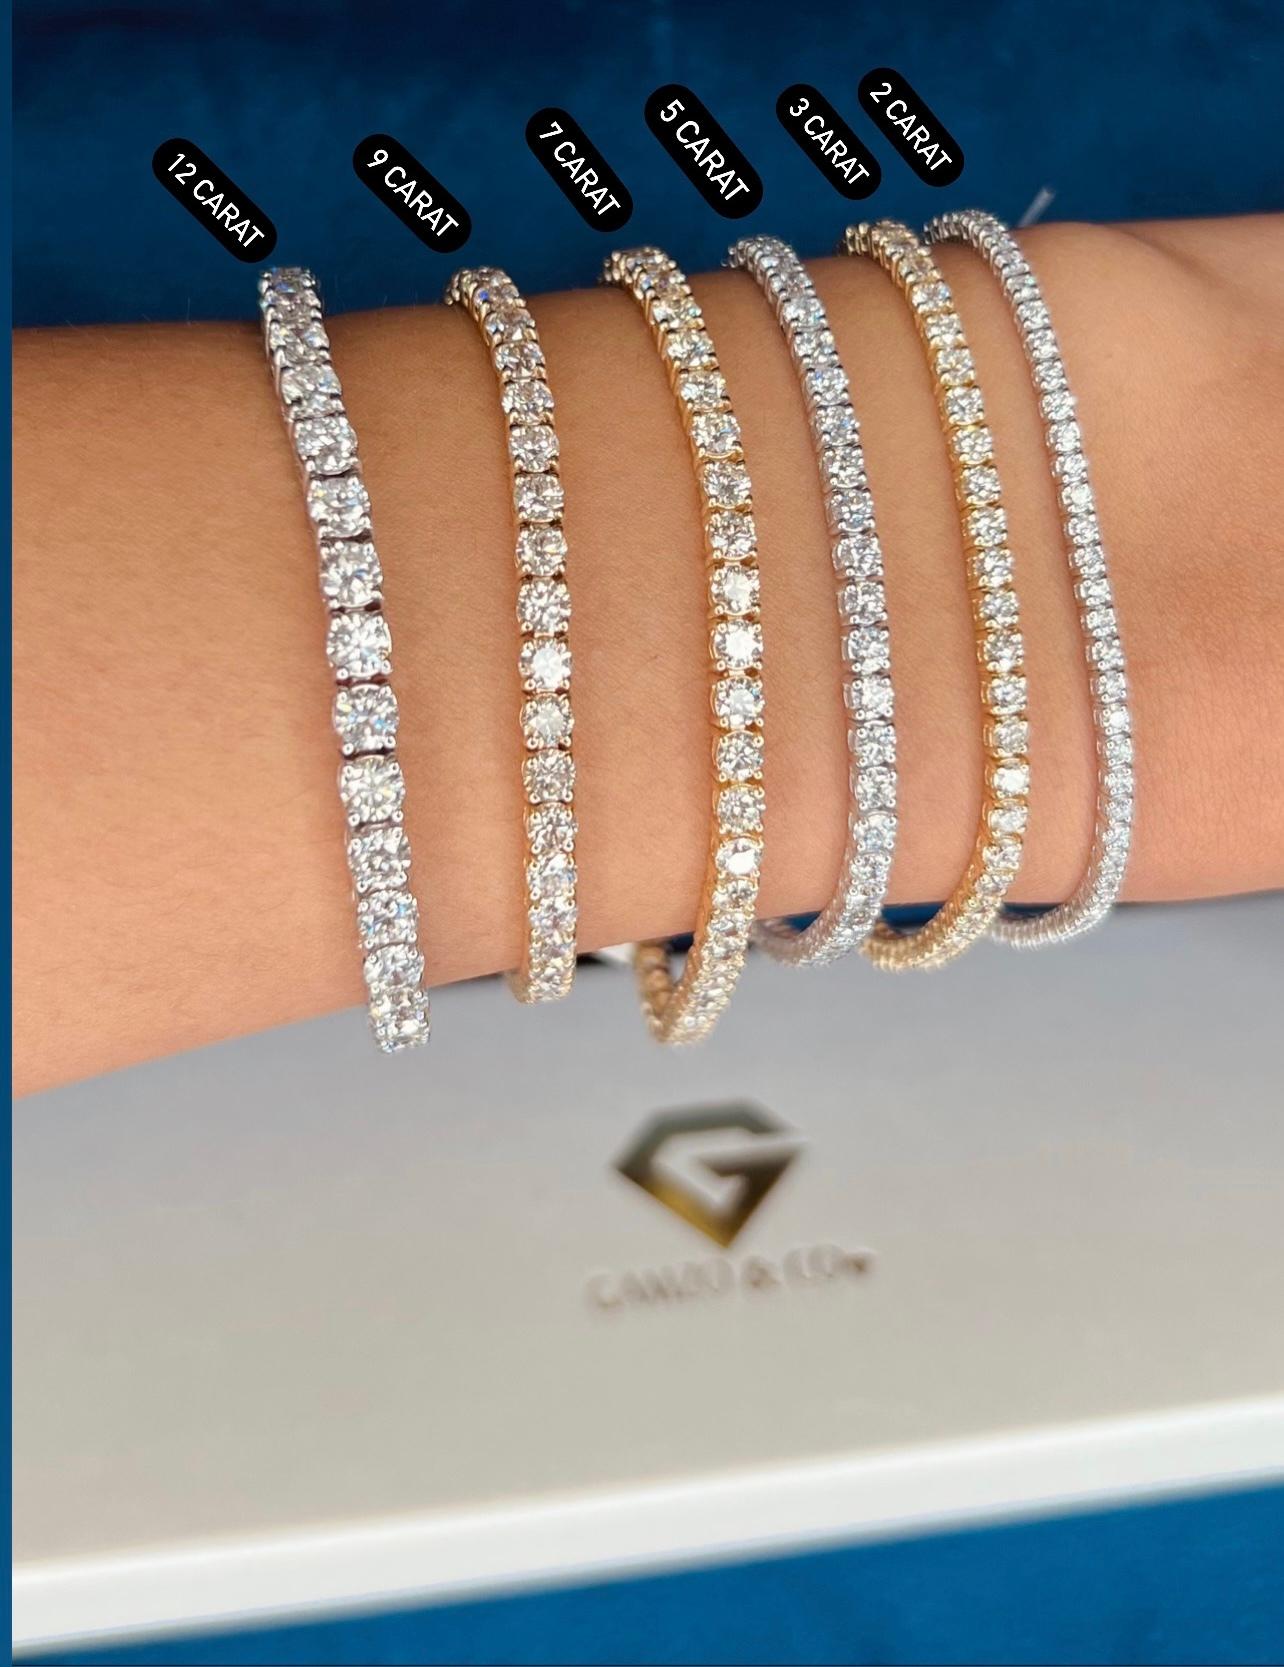 This diamond tennis bracelet features beautifully cut round diamonds set gorgeously in 14k gold.

Metal: 14k Gold
Diamond Cut: Round Natural Diamond 
Total Diamond Carats: 3ct
Diamond Clarity: VS
Diamond Color: F-G
Color: Rose Gold
Bracelet Length: